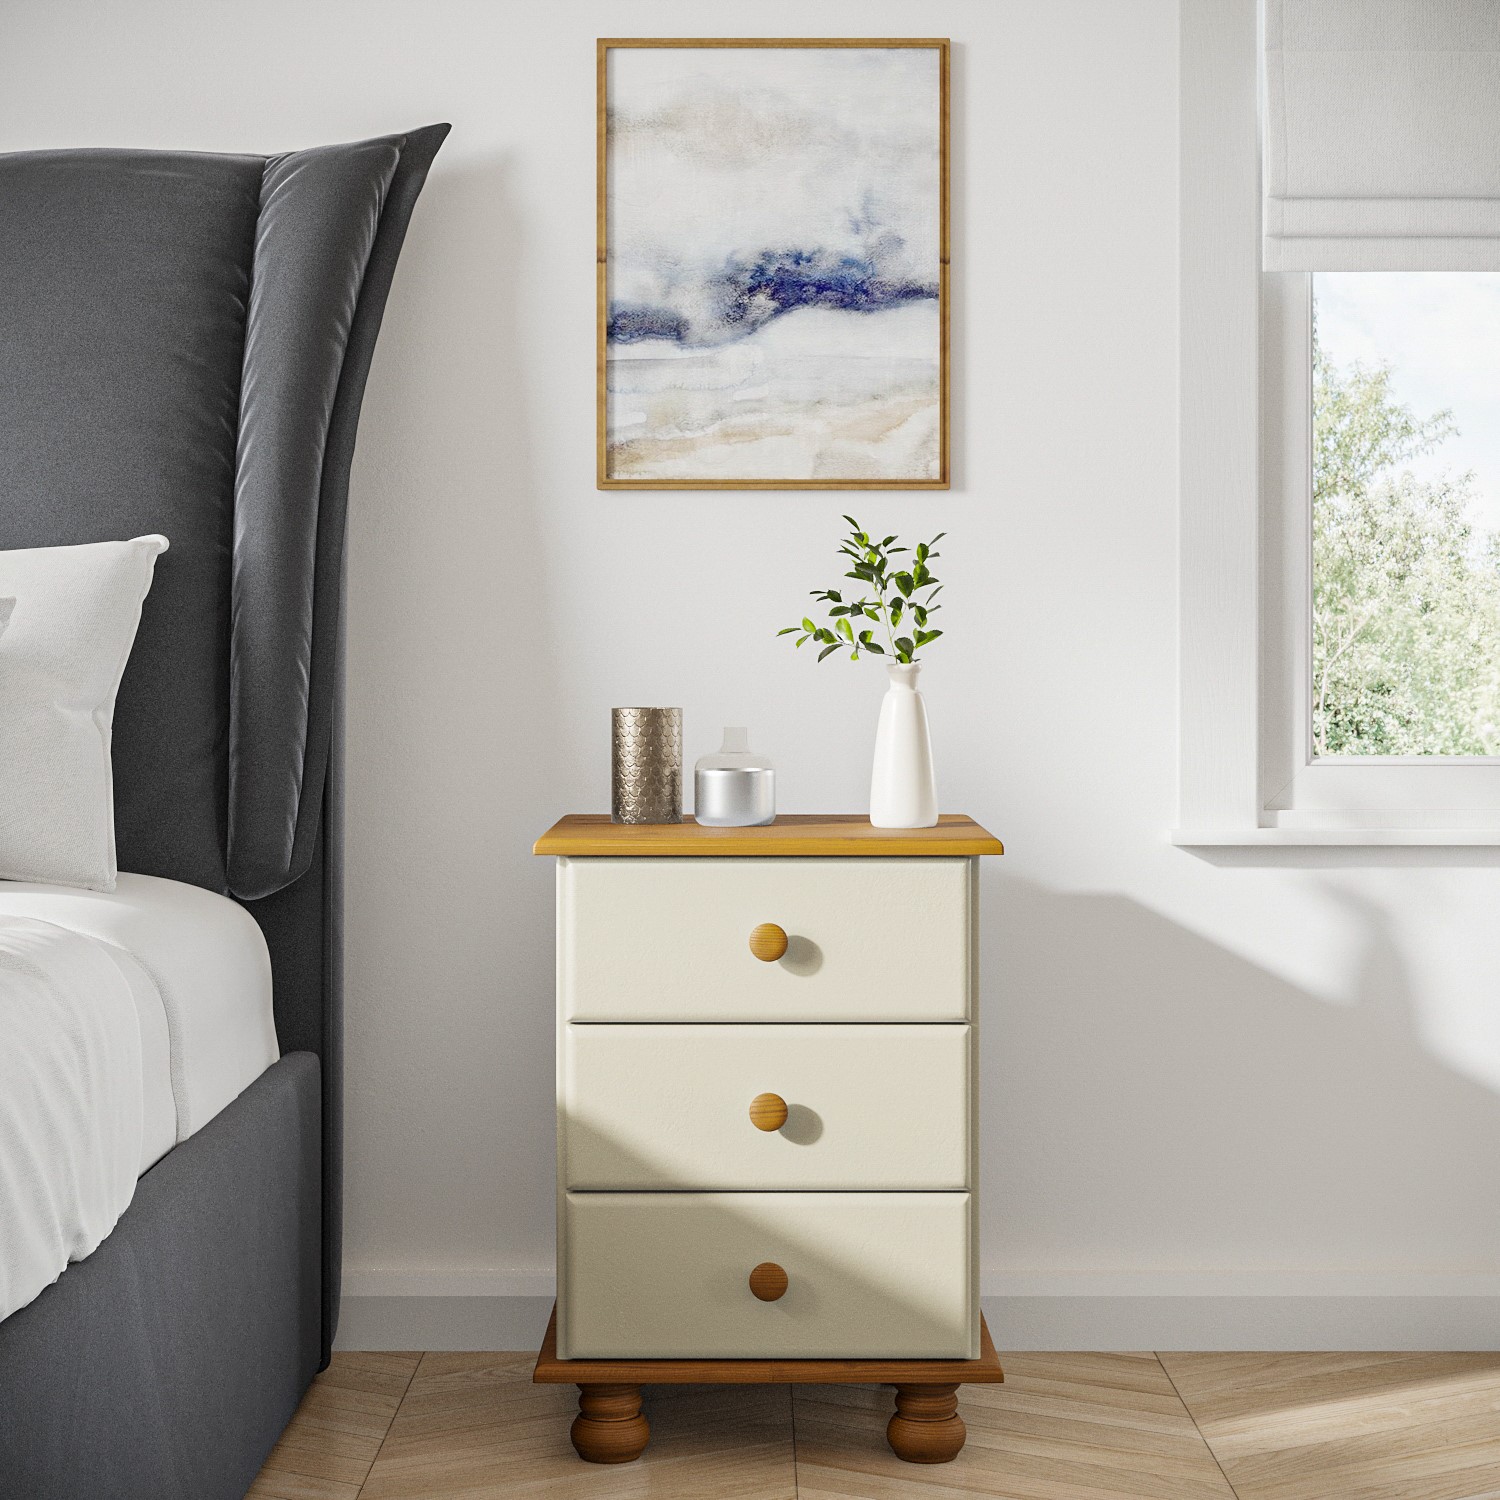 Read more about Cream and pine 3 drawer bedside table hamilton